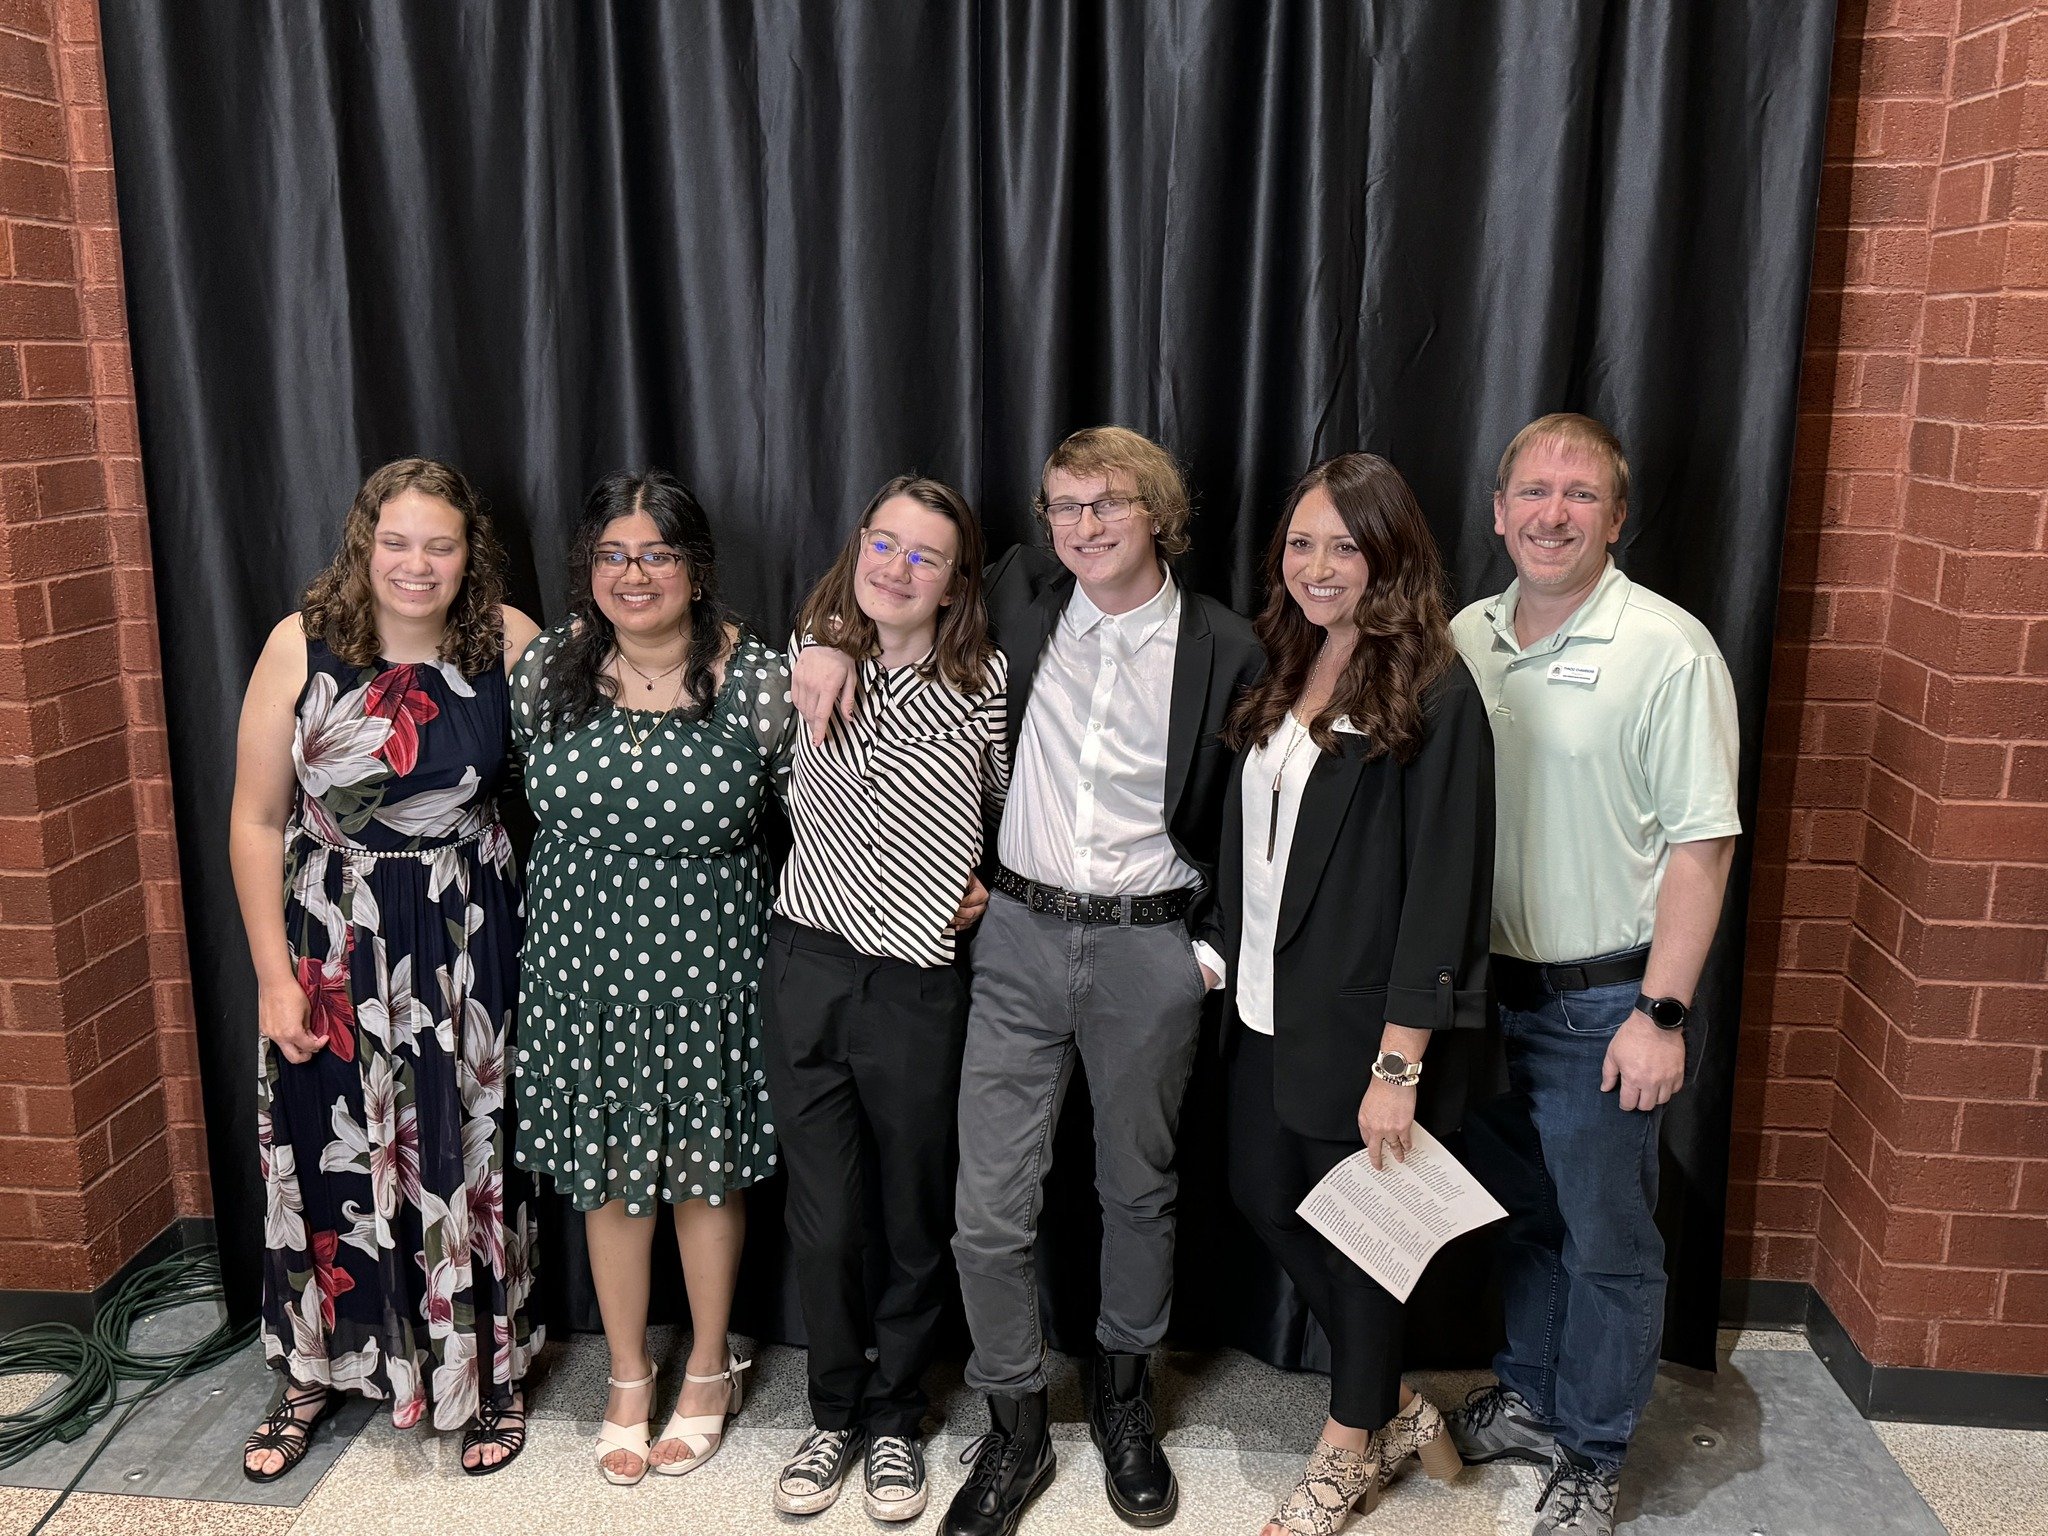 Congratulations to our 2024 Bentonville West Band Booster Scholarship recipients! 

Band Leadership: Danielle Machado
Instrumental Music Major/Minor: Rebecca Johnson
Band Musician/Visual Marching: Sofia Upton
Wolverine Band Boosters: Connor Billings